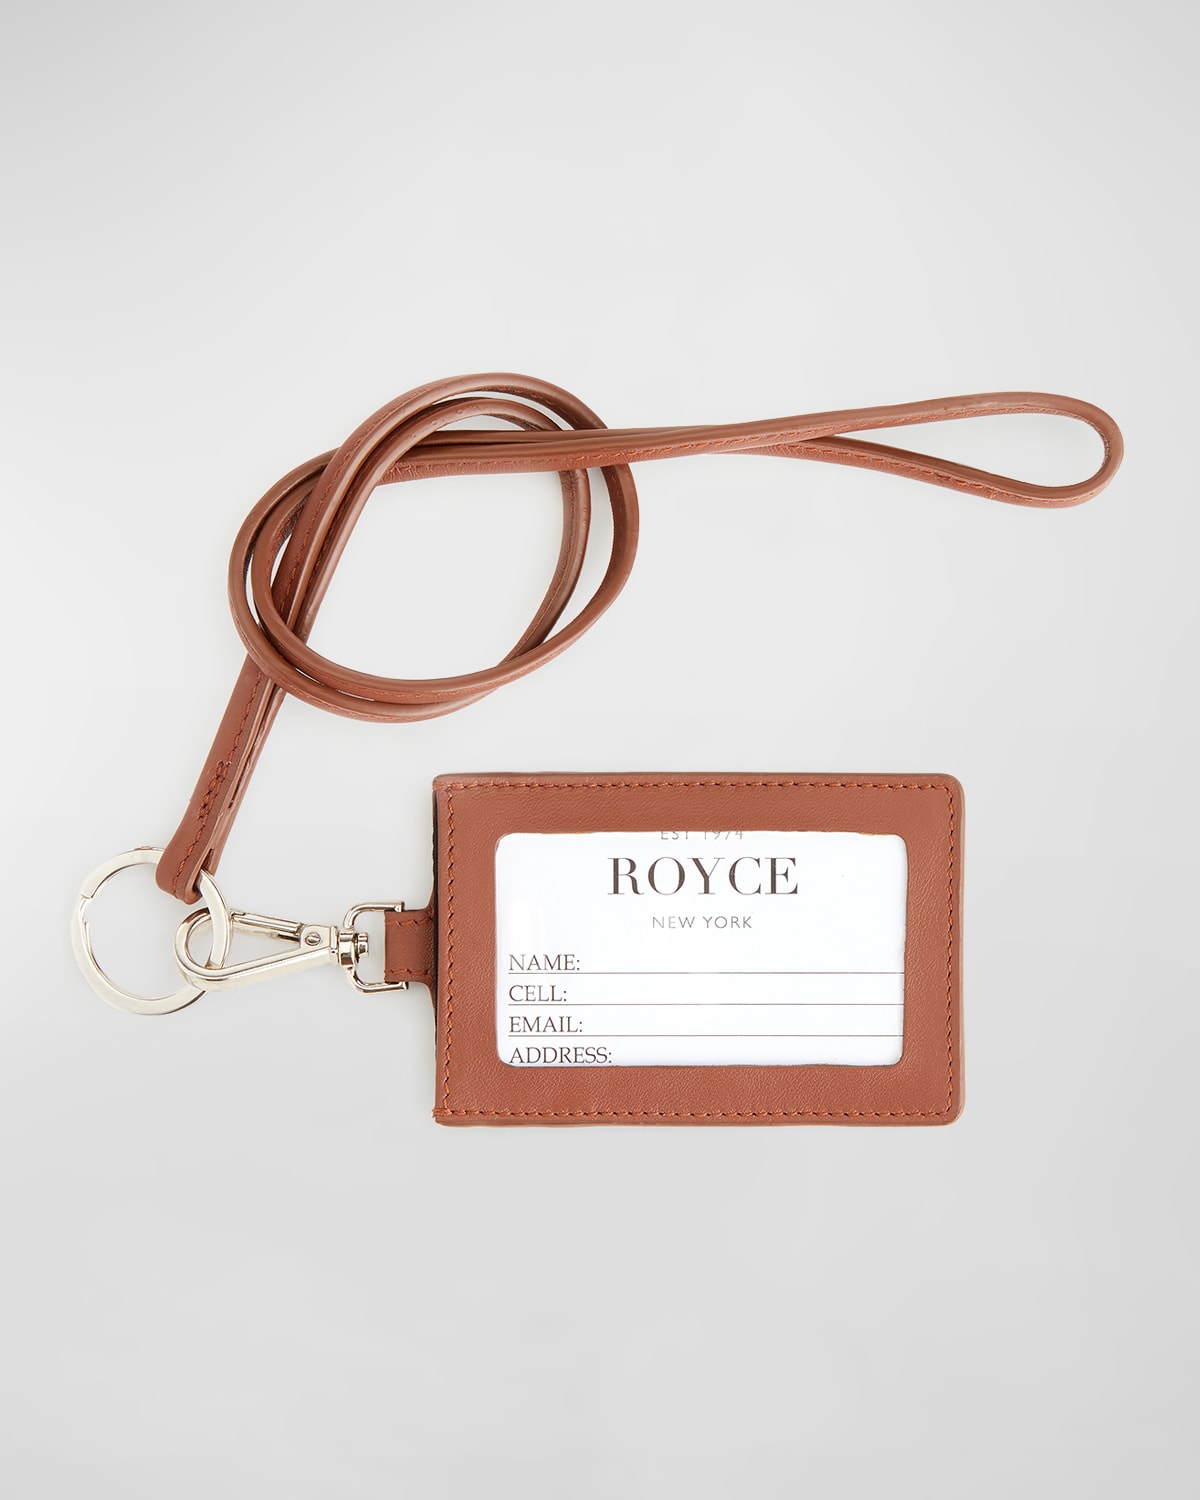 ROYCE NEW YORK PERSONALIZED LEATHER LANYARD ID HOLDER